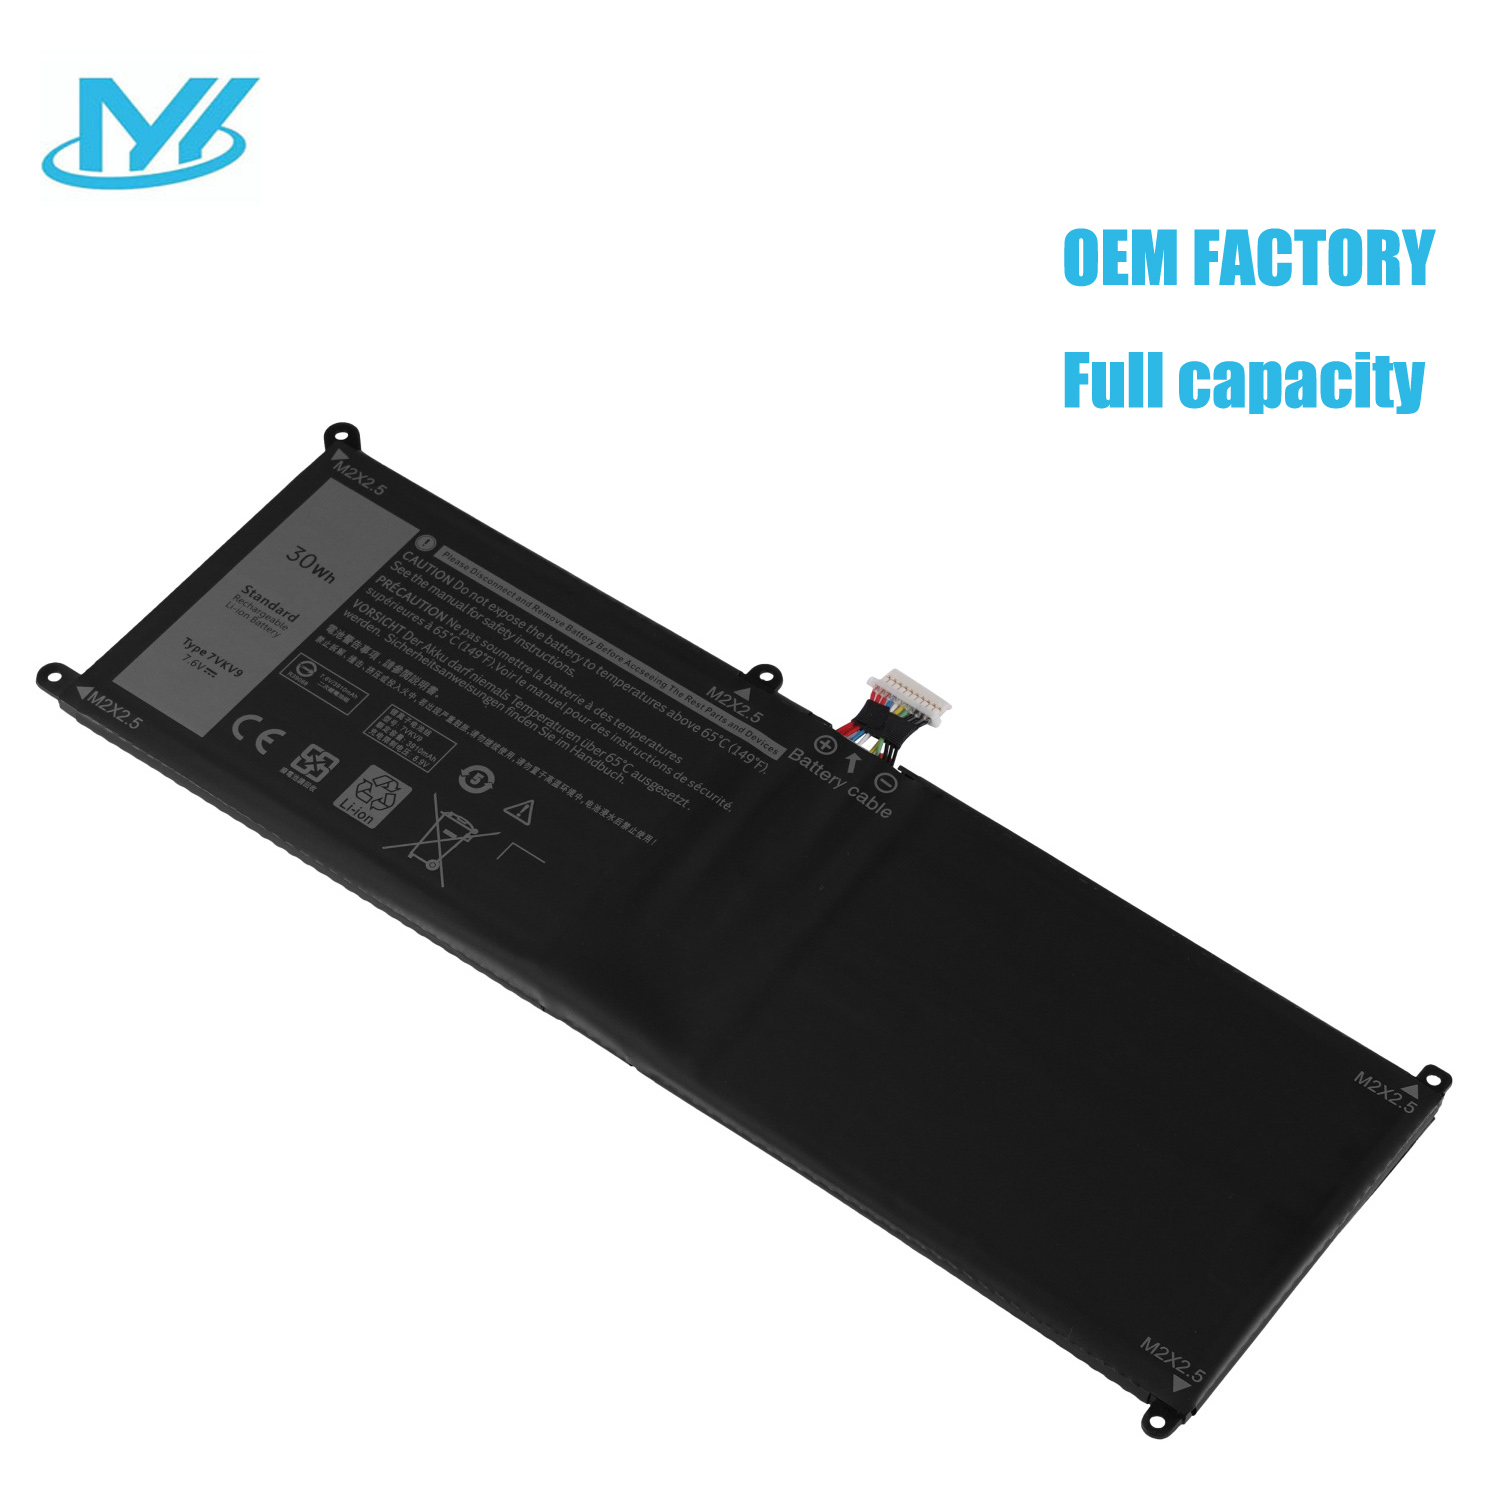 7VKV9 7.6V 30Wh Notebook battery laptop Battery Replacement for DELL Latitude XPS 12 7000 7275 9250 9TV5X laptop